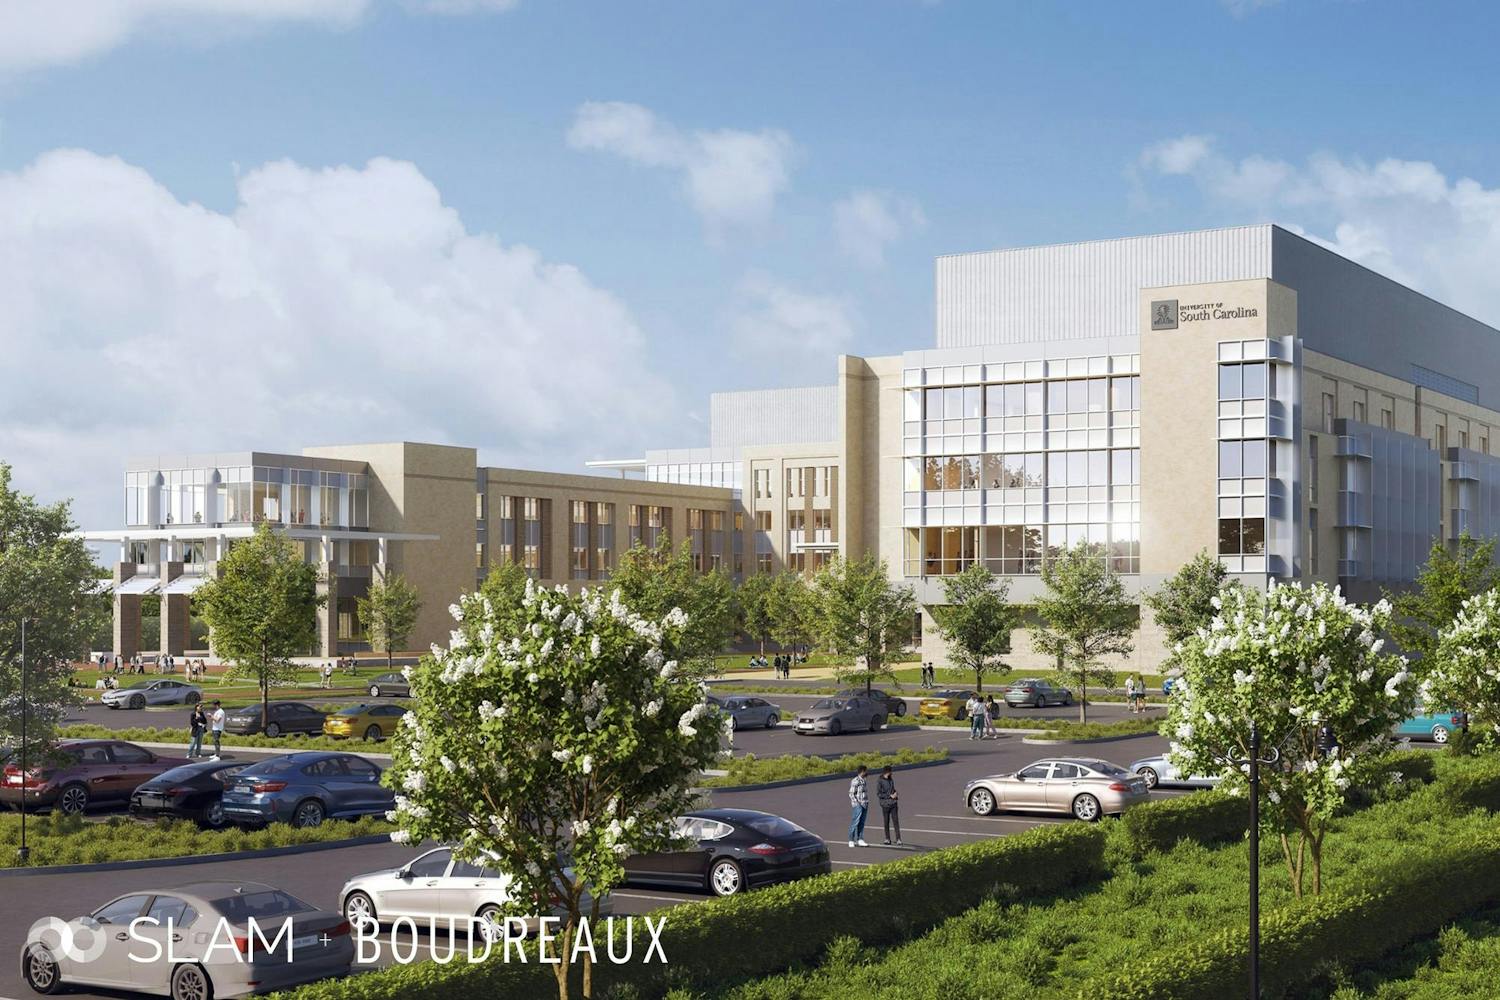 A rendered image of the future building for South Carolina's School of Medicine. The building is set to be located in the BullStreet district and is slated to be completed by the fall of 2027. The original plan included two separate buildings but was amended to include only one to reflect collaboration between education and research.